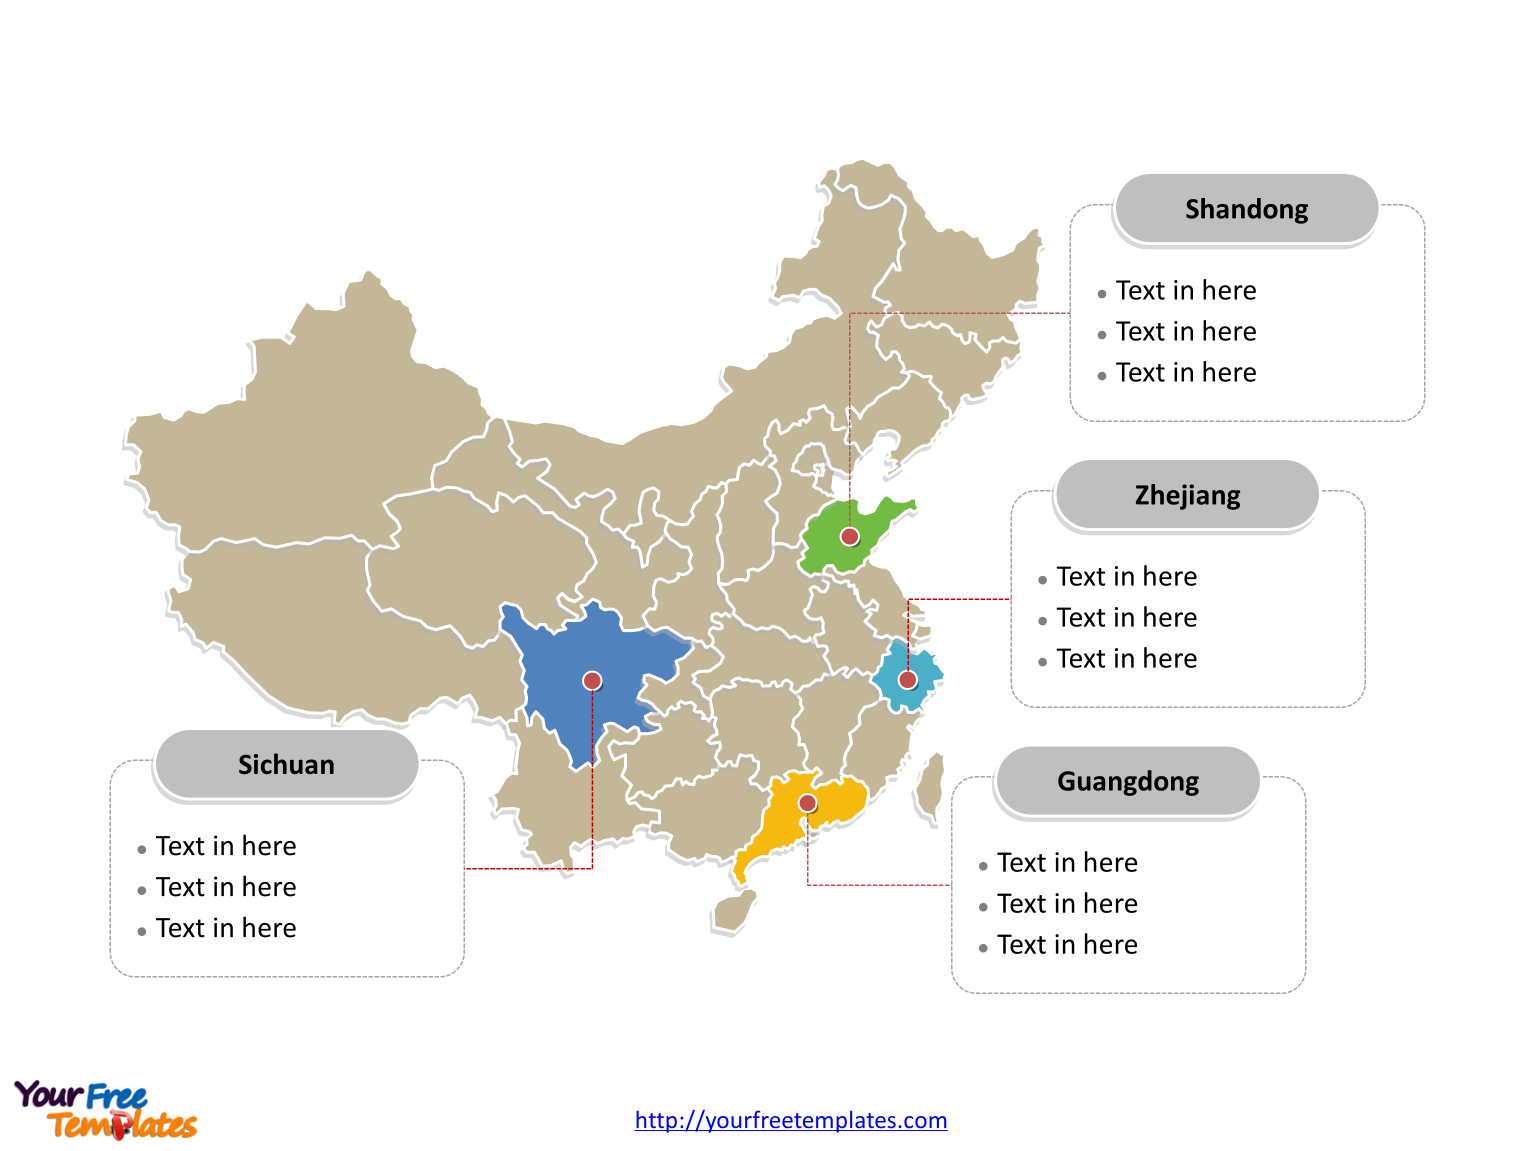 Map of China with political division and major provinces labeled on the China map download